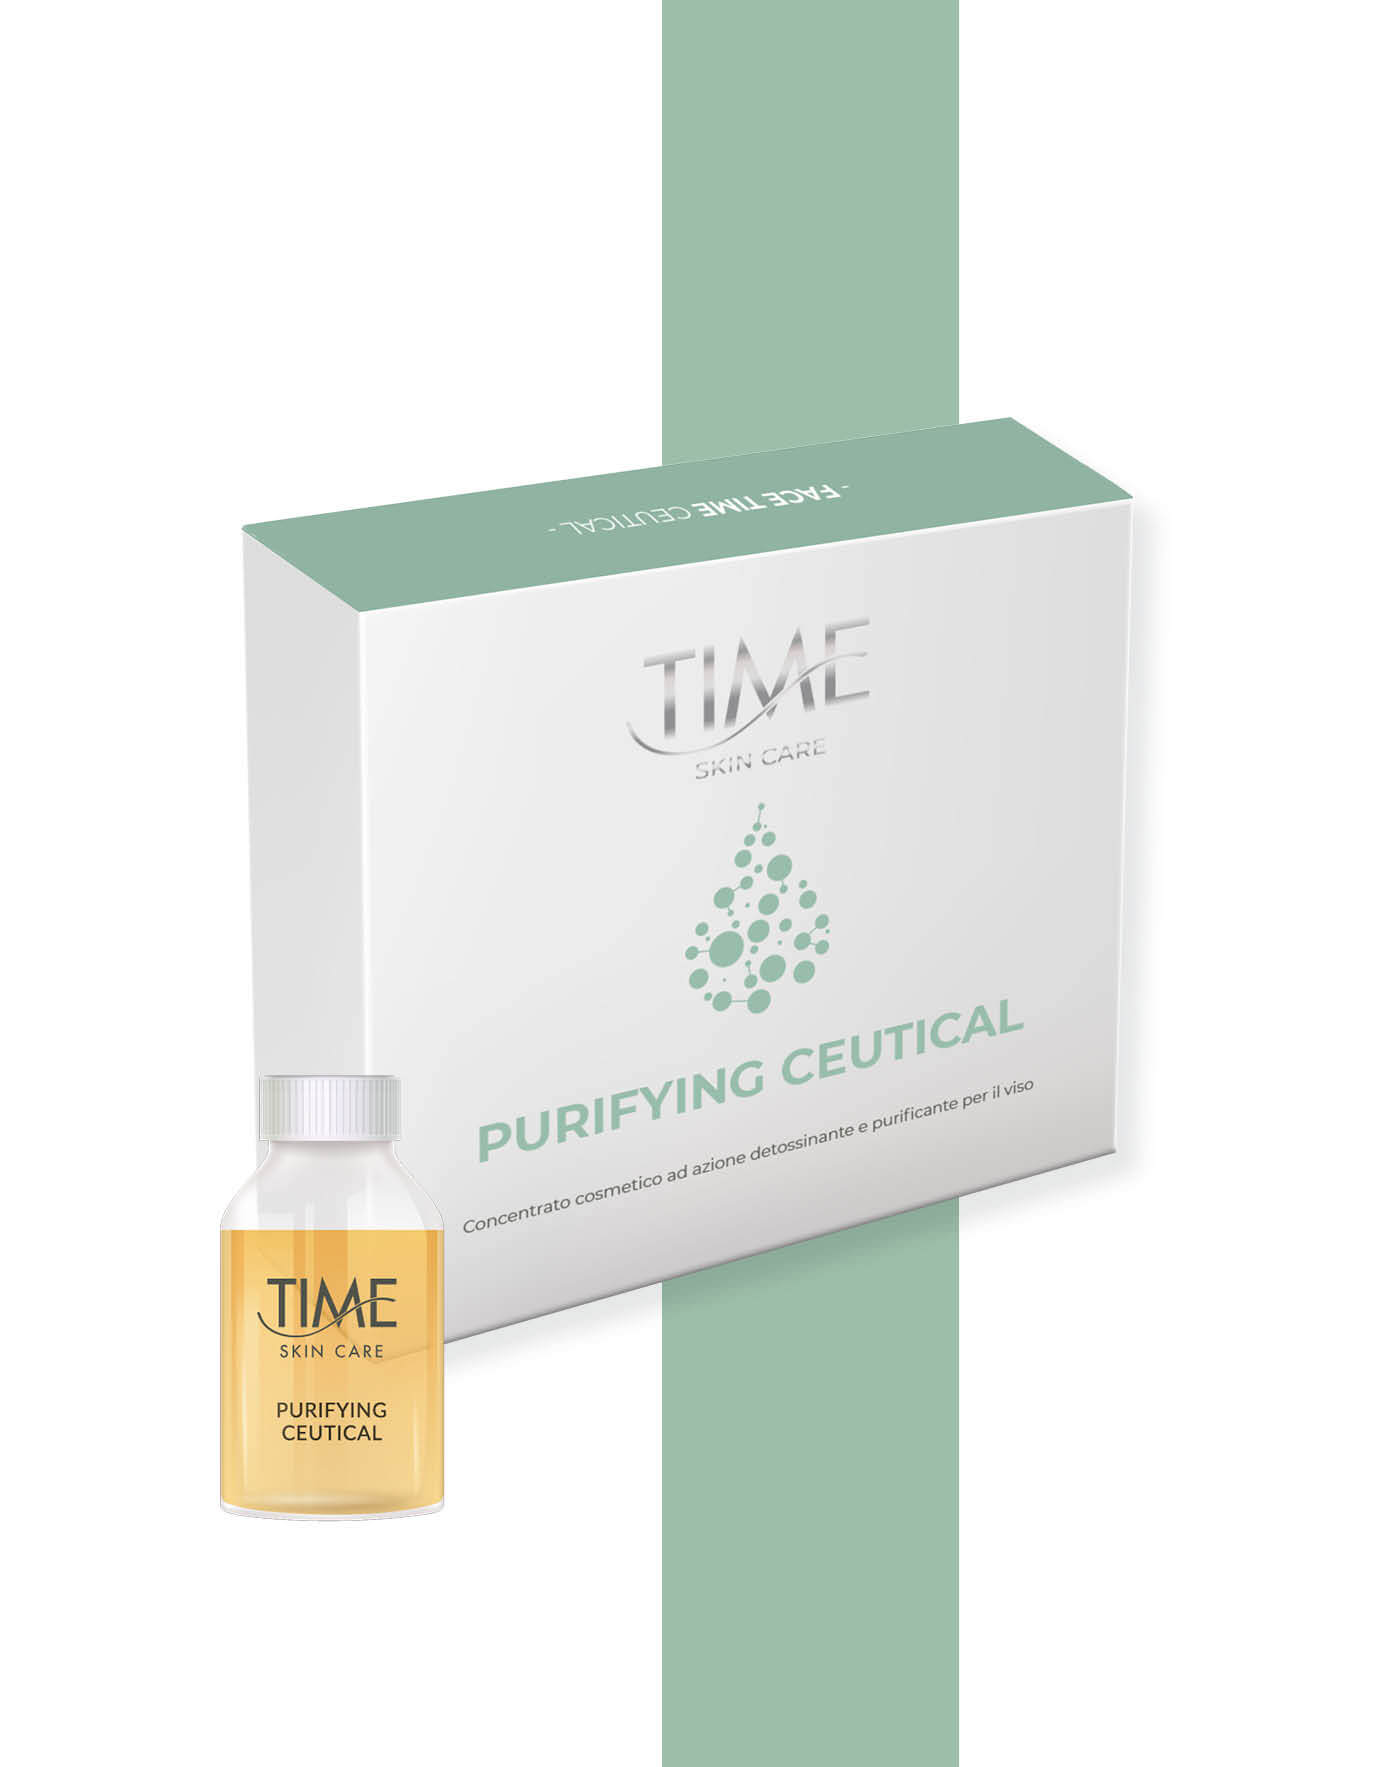 Purifying ceutical